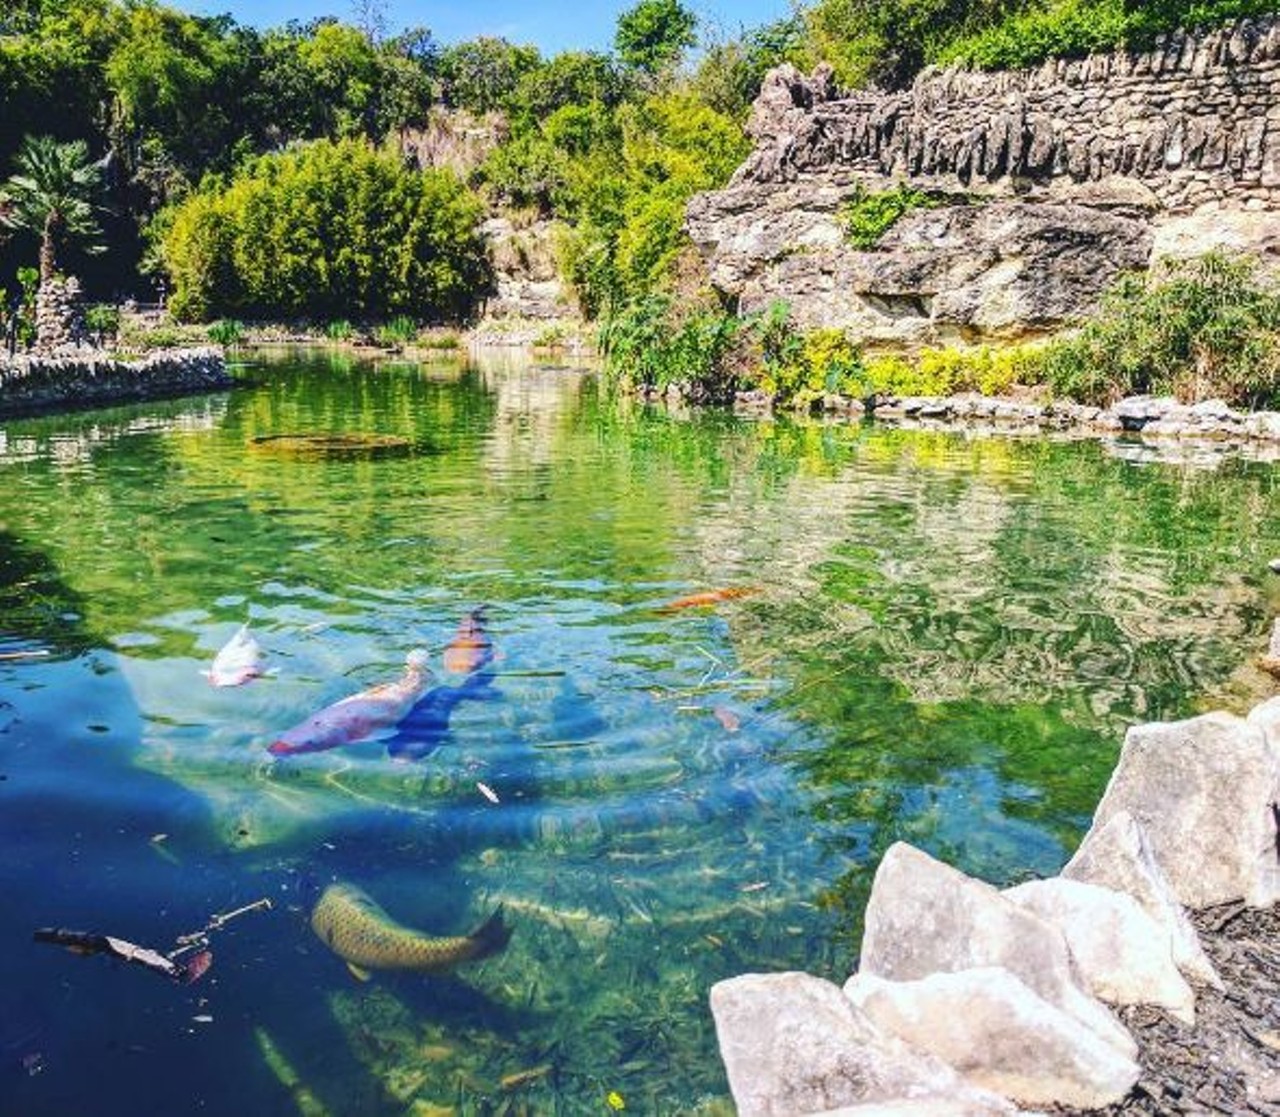 Find zen at the Japanese tea gardens 
3853 N St Mary's St, (210) 559-3148, sanantonio.gov
Center yourself at one of San Antonio&#146;s most beautiful spots.
Photo via Instagram, totallyjeanette